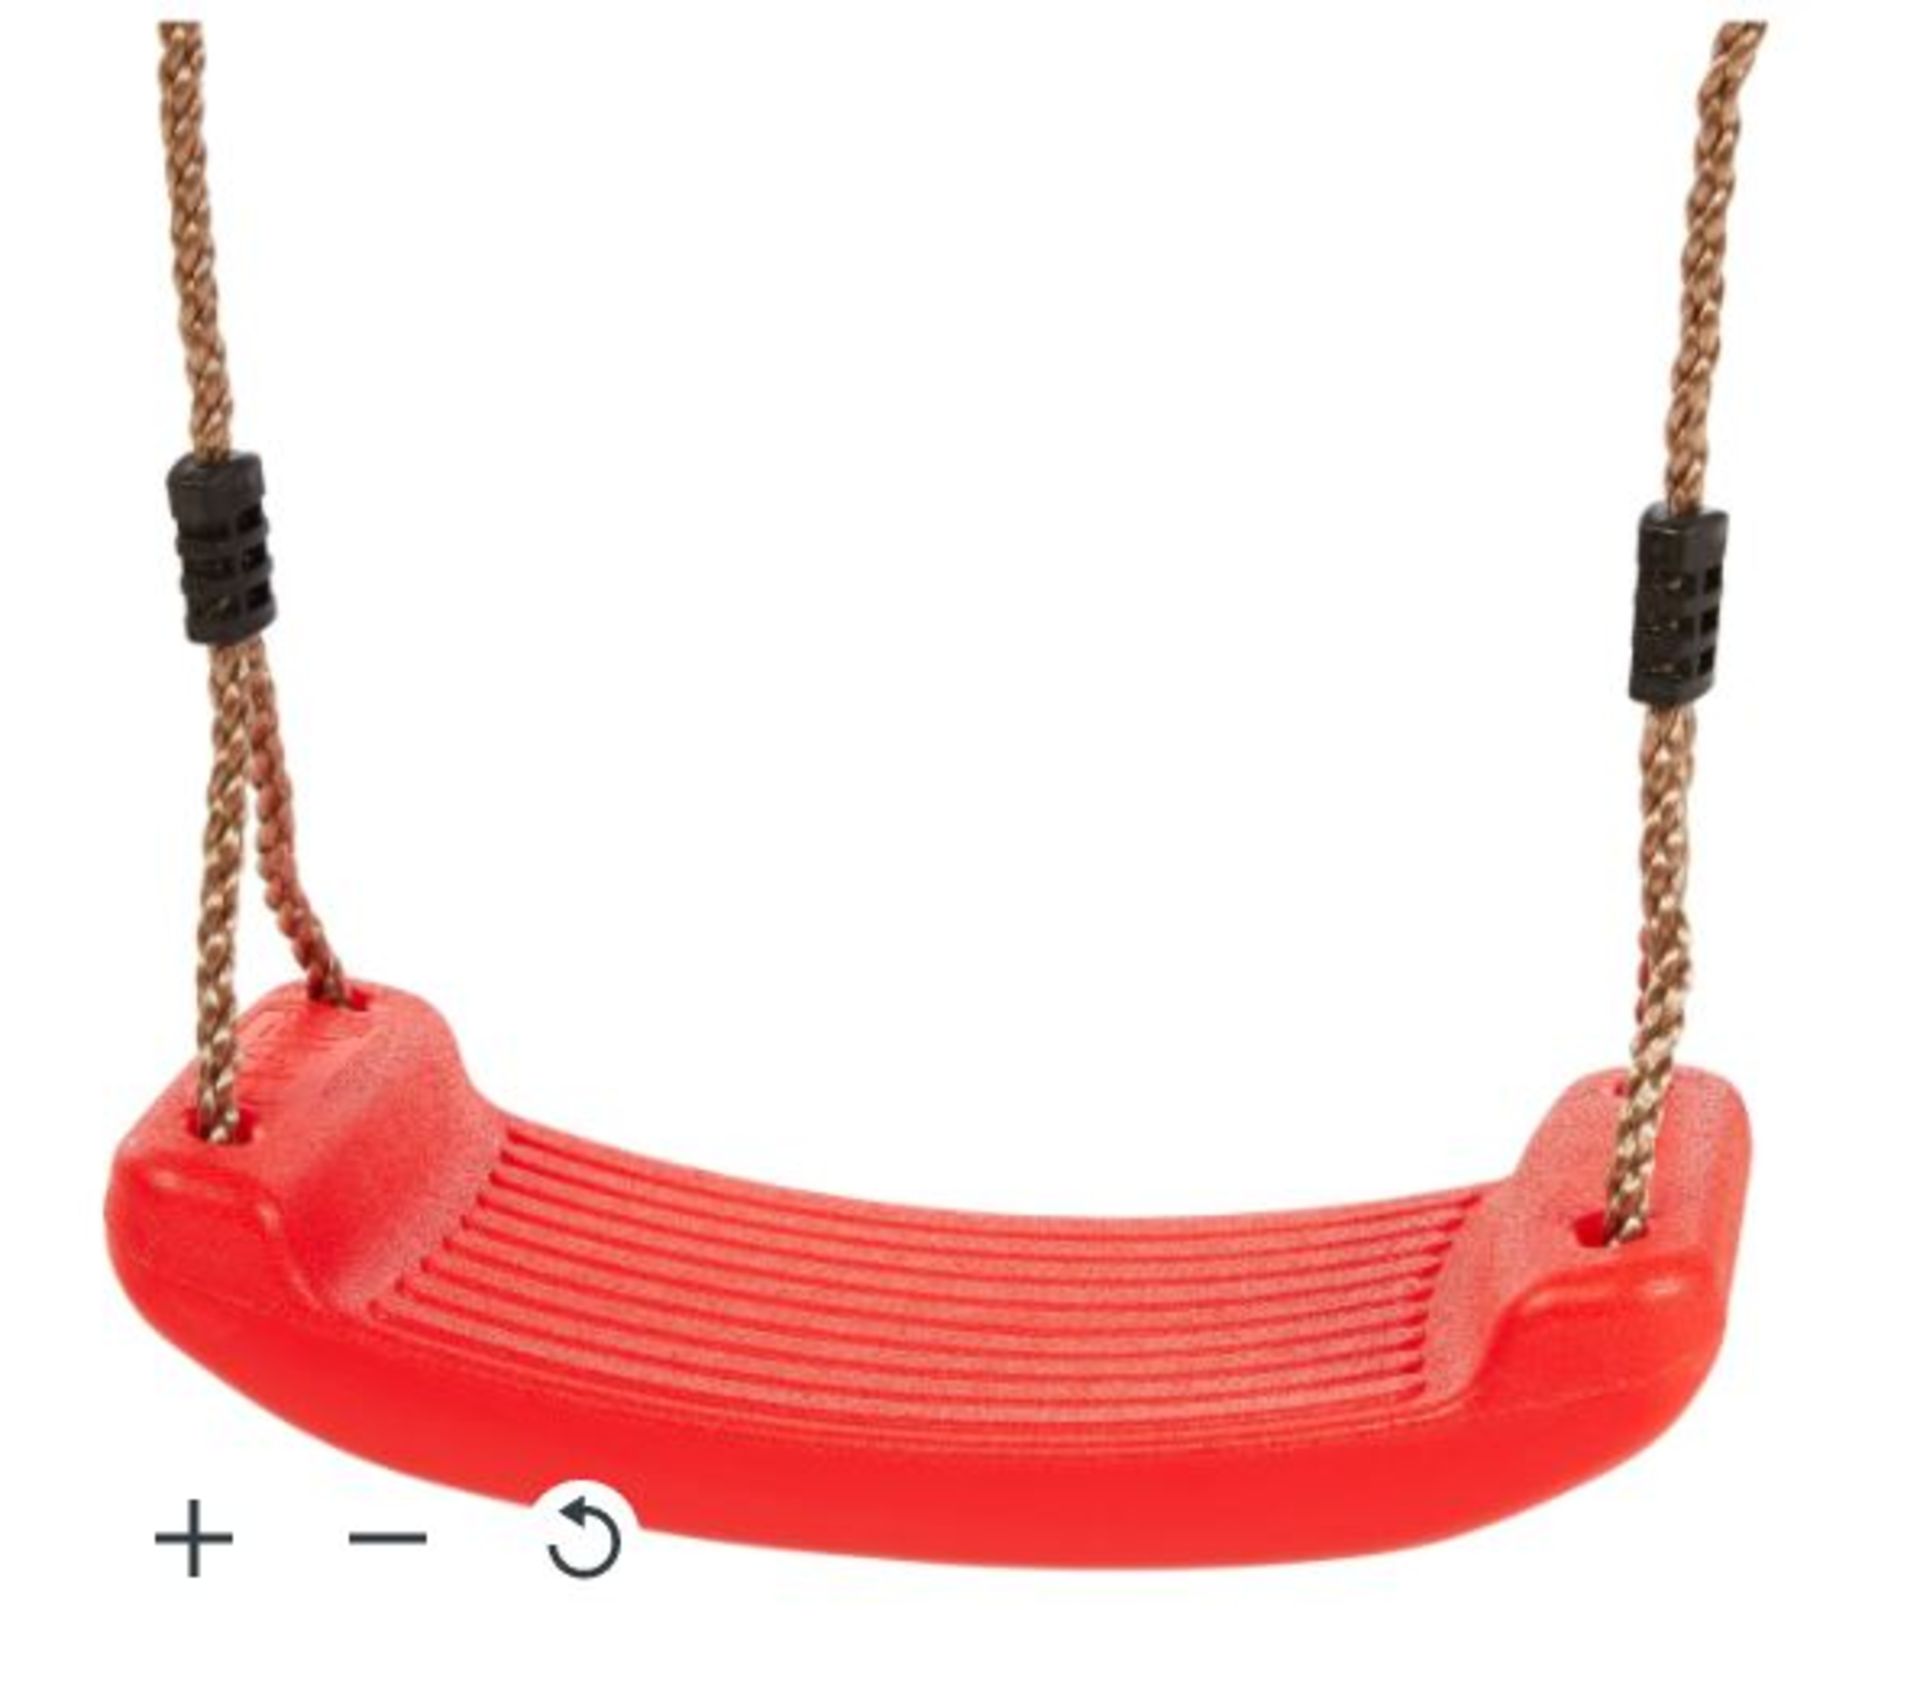 2 x Wooden Swing Sets. Comes with Red swing seat, swing hook & instruction manual. Product height - Image 3 of 3